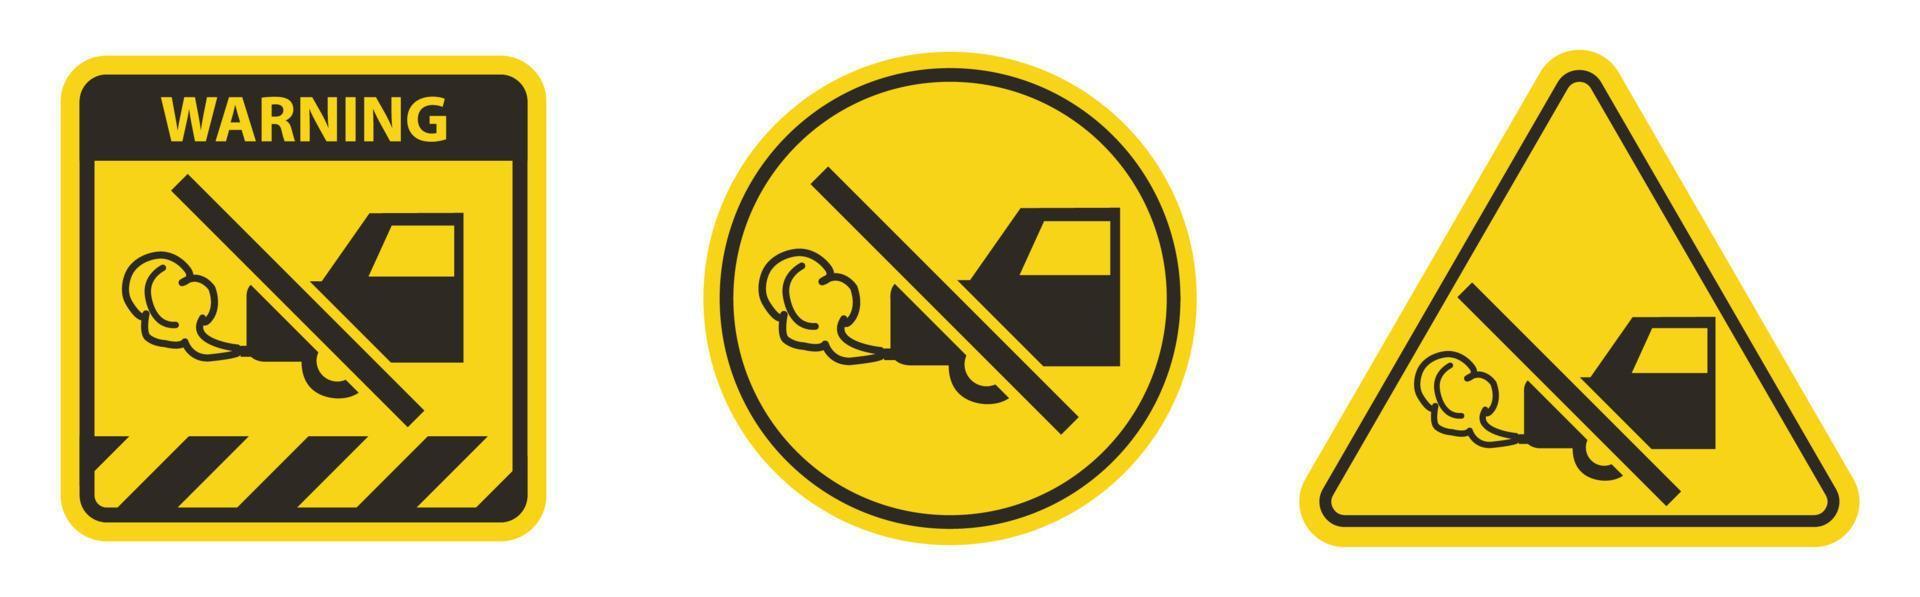 Do Not Switch On Engine Symbol vector